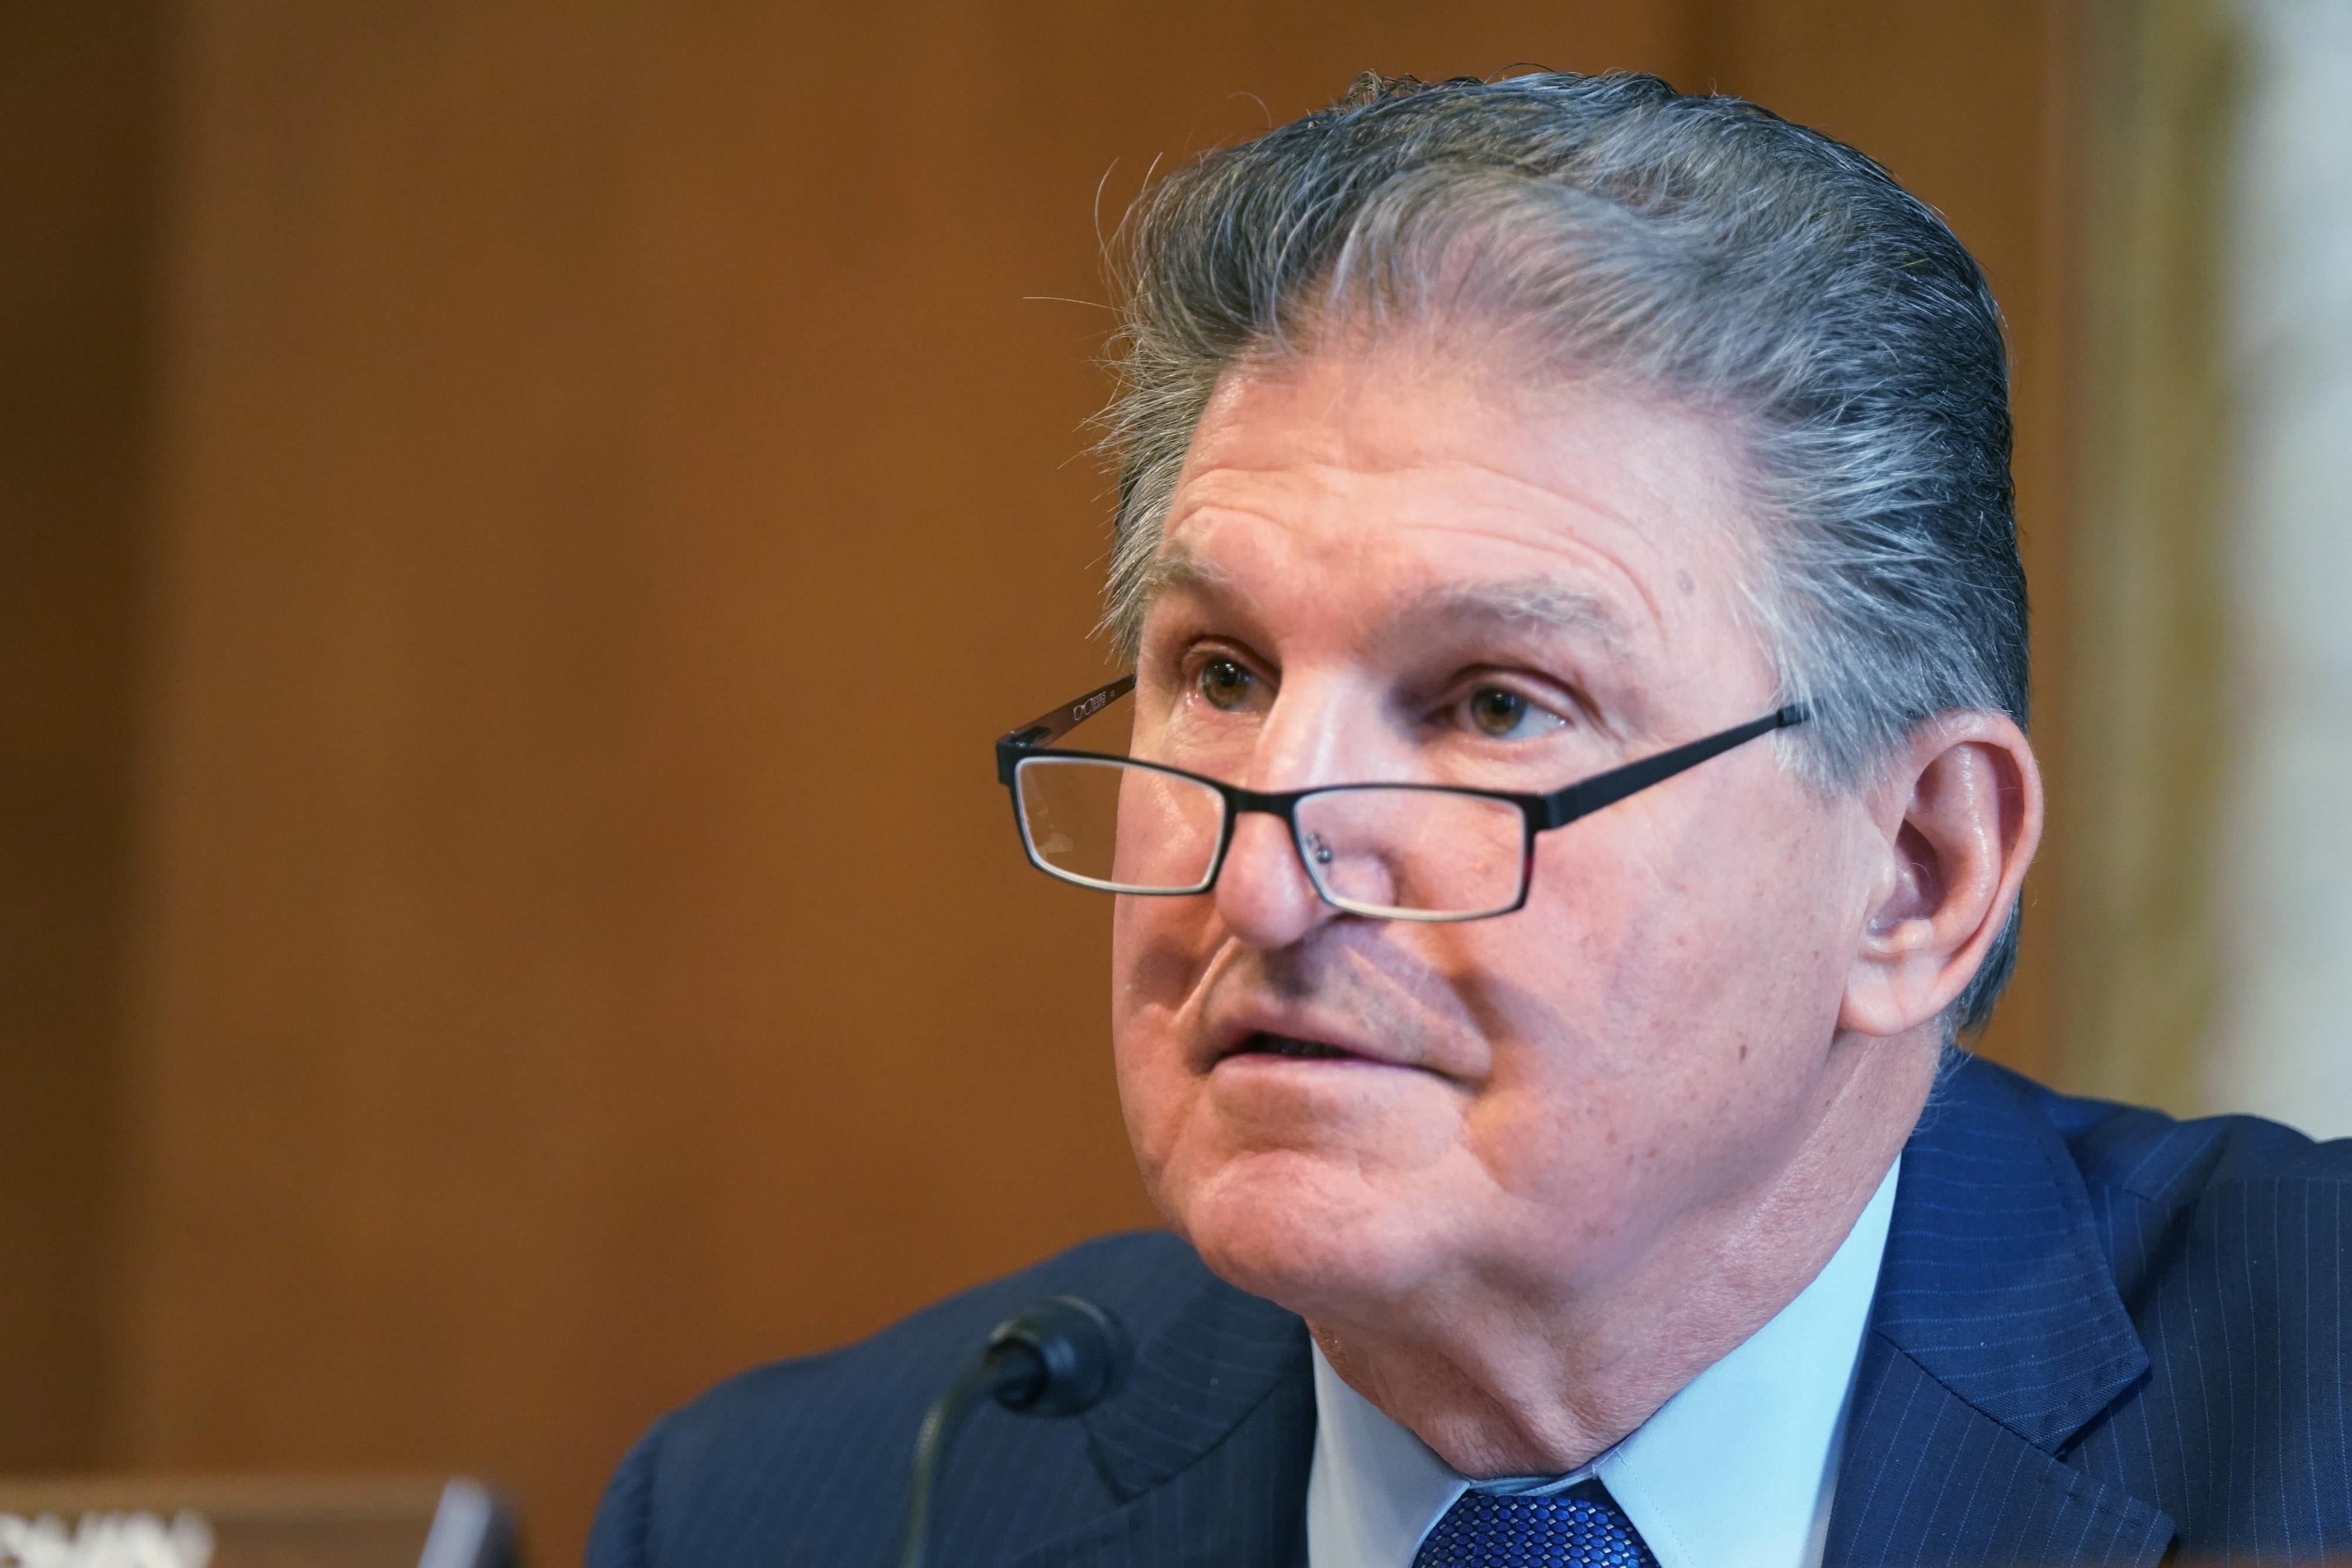 Sen. Joe Manchin, (D-WV) chairman of the Senate Committee on Energy and Natural Resources, is seen asking questions during a hearing at the U.S. Capitol on February 24, 2021 in Washington, DC.